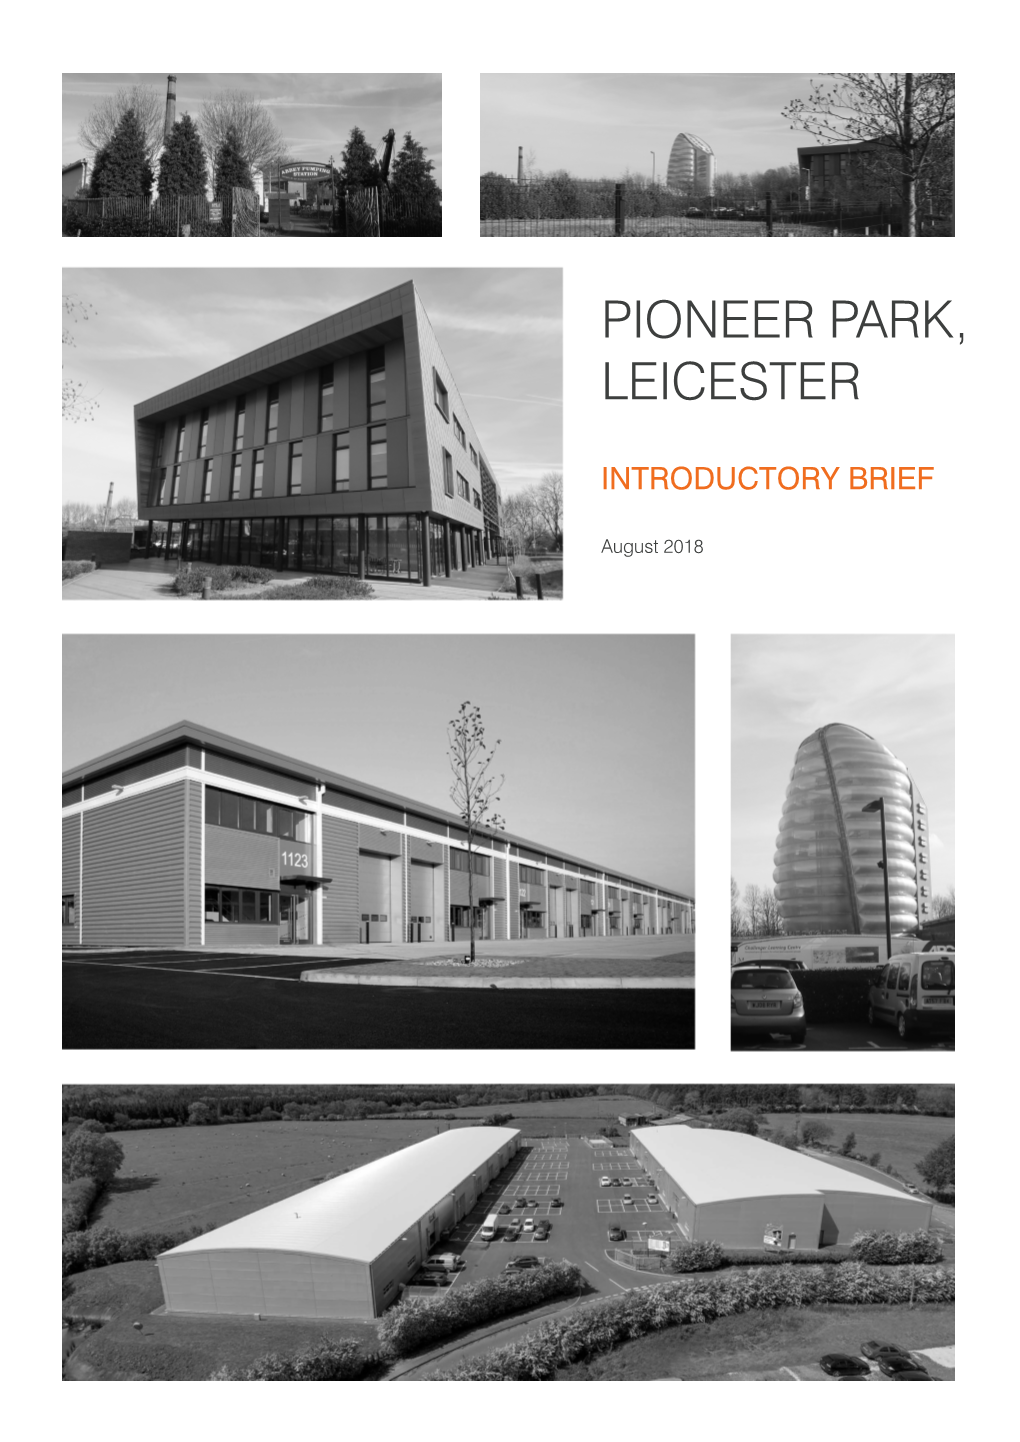 Pioneer Park, Leicester